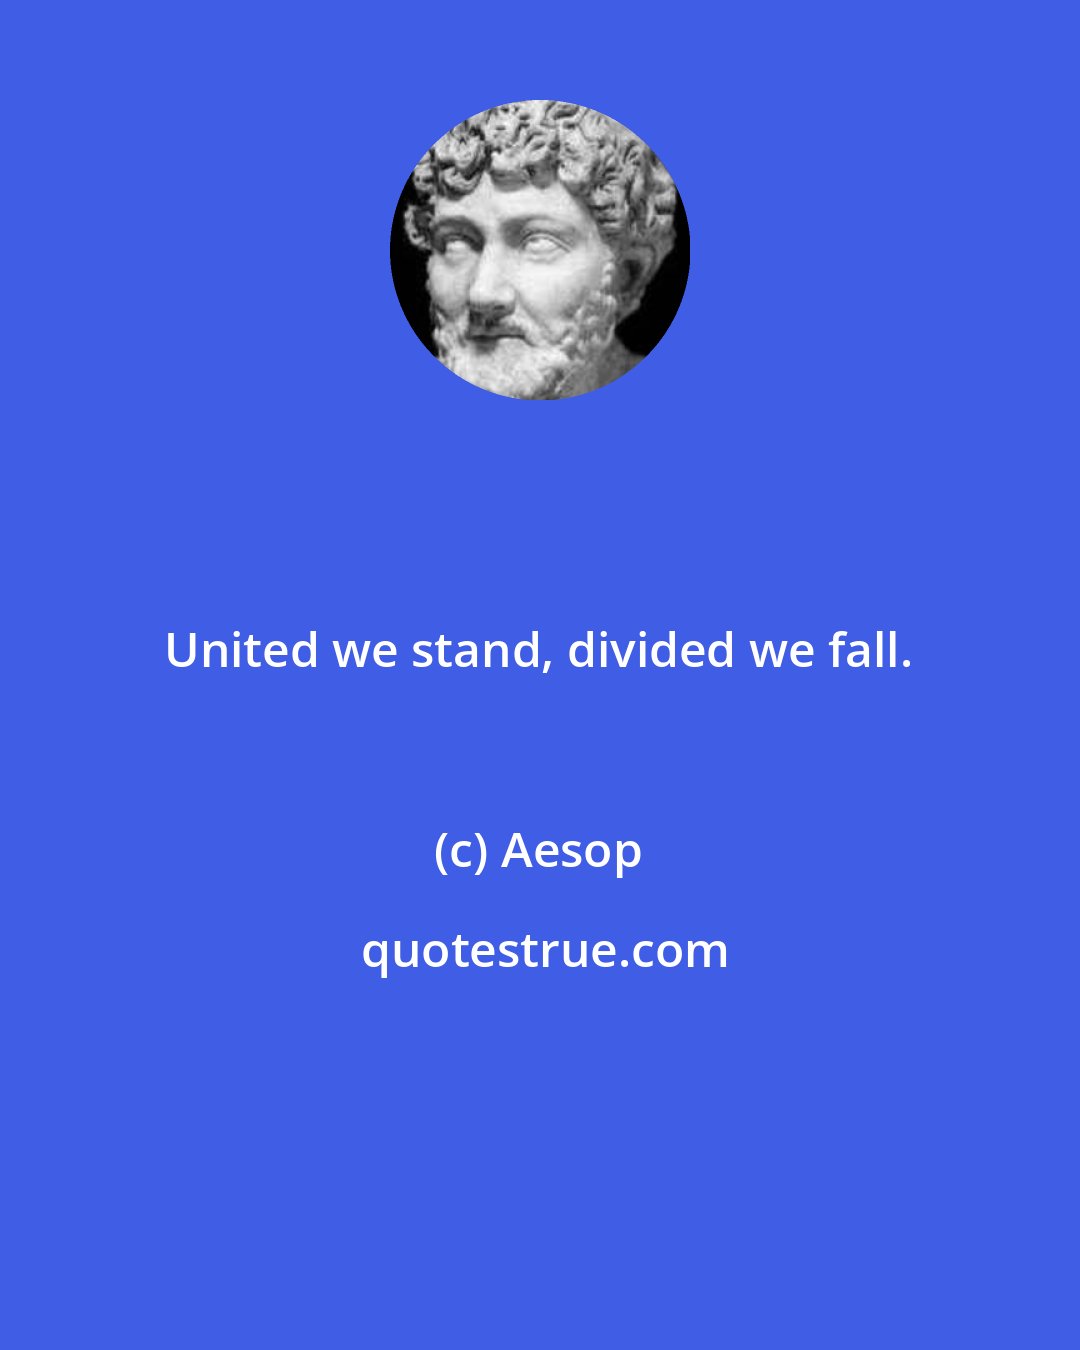 Aesop: United we stand, divided we fall.